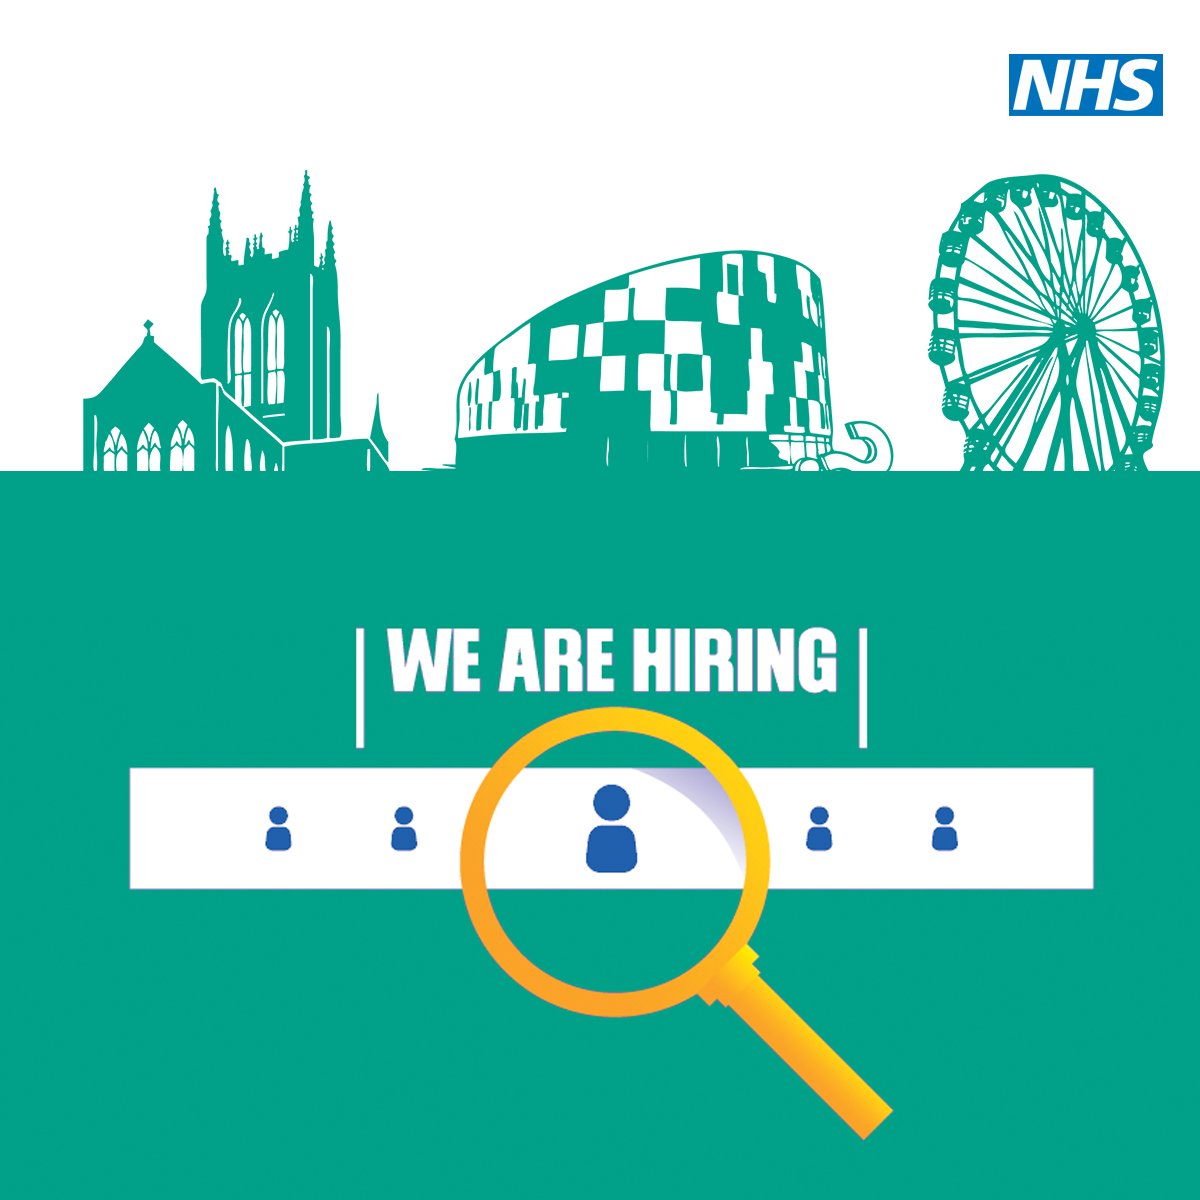 We have a new job vacancy - Emergency Preparedness, Resilience and Response Support Officer - read more beta.jobs.nhs.uk/candidate/joba…